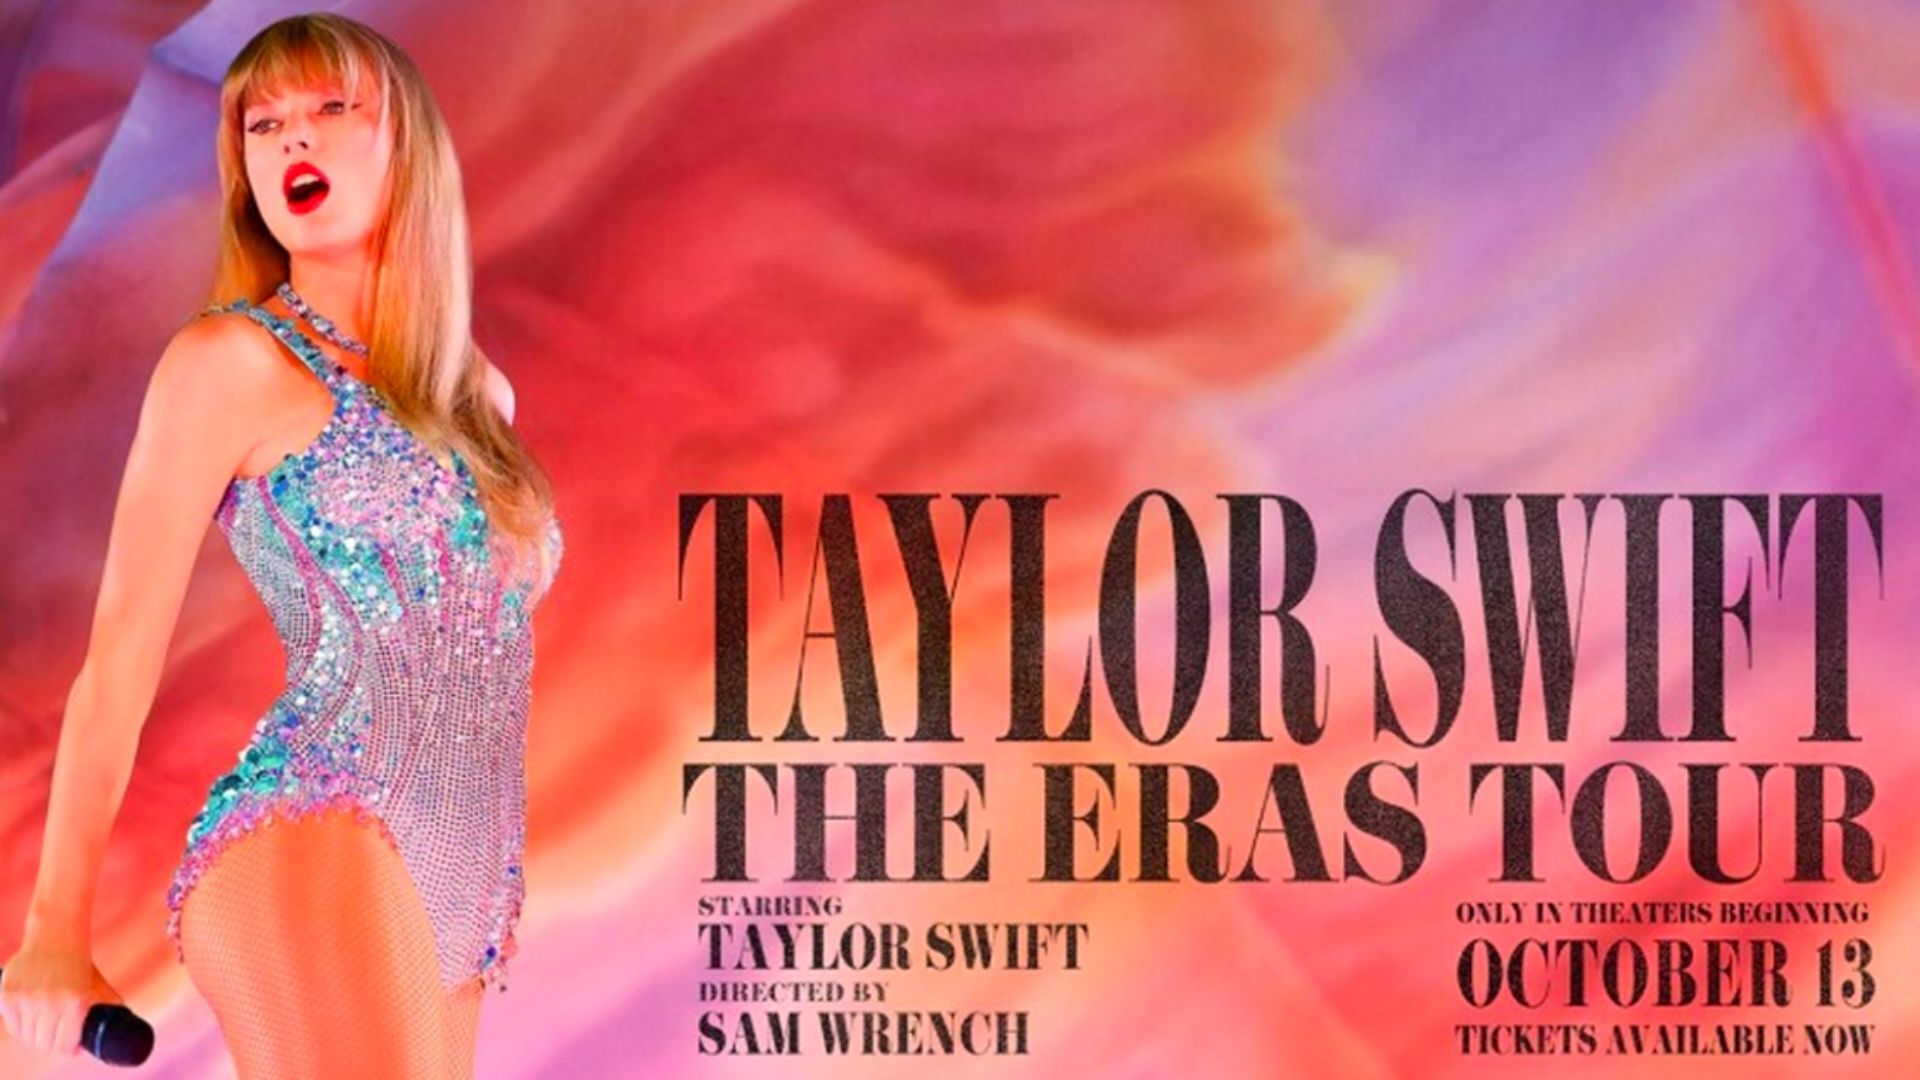 Taylor Swift's Favorite Sports Bra for the Eras Tour Is Now On Sale - Parade